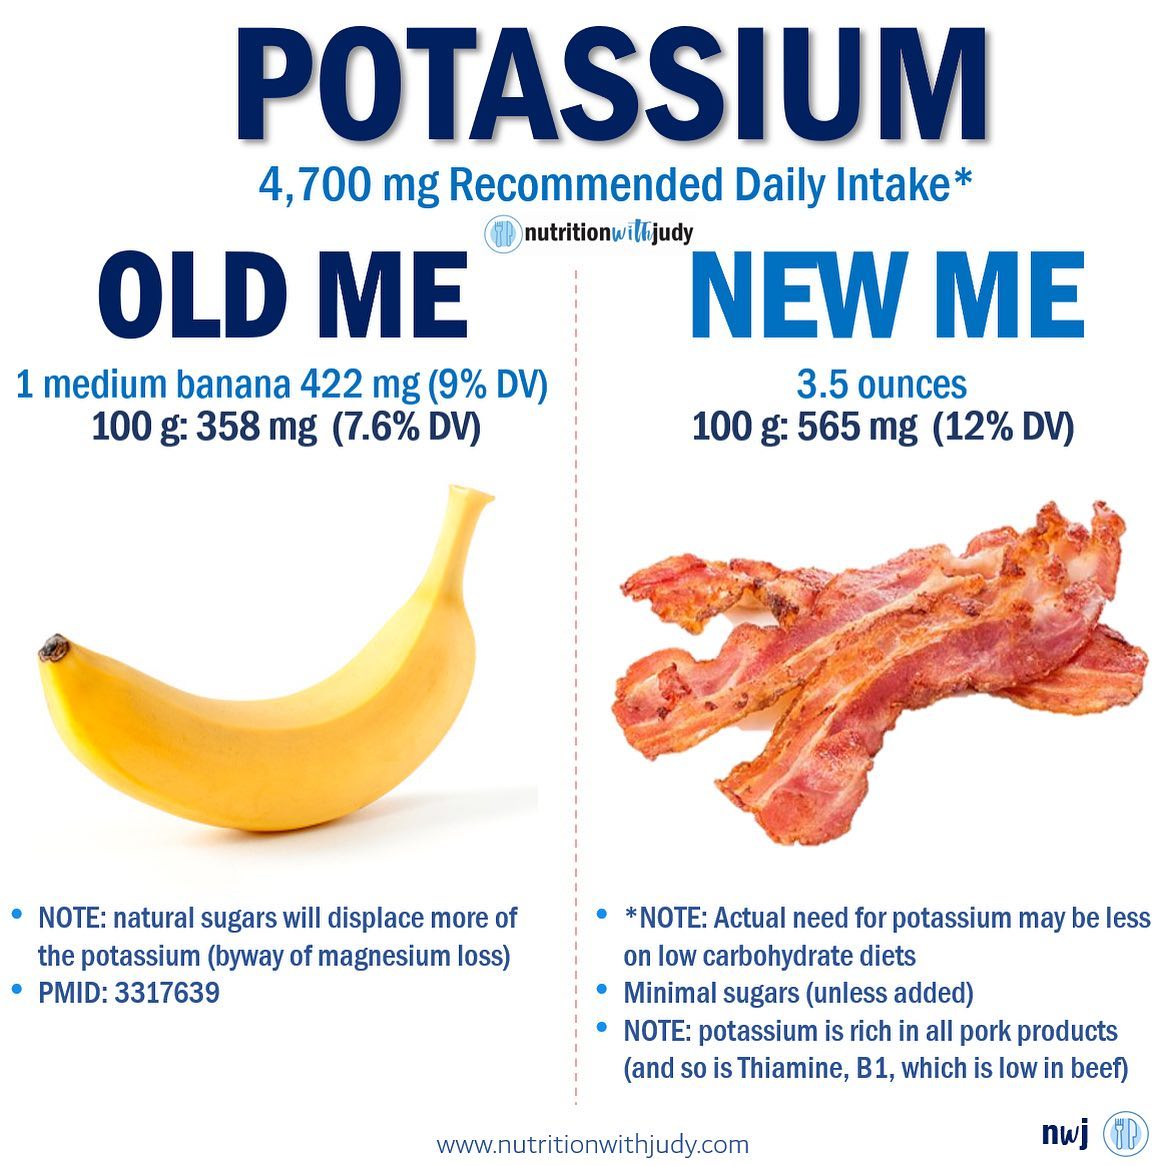 Microblog: Potassium in Meat? Yes! - Nutrition With Judy